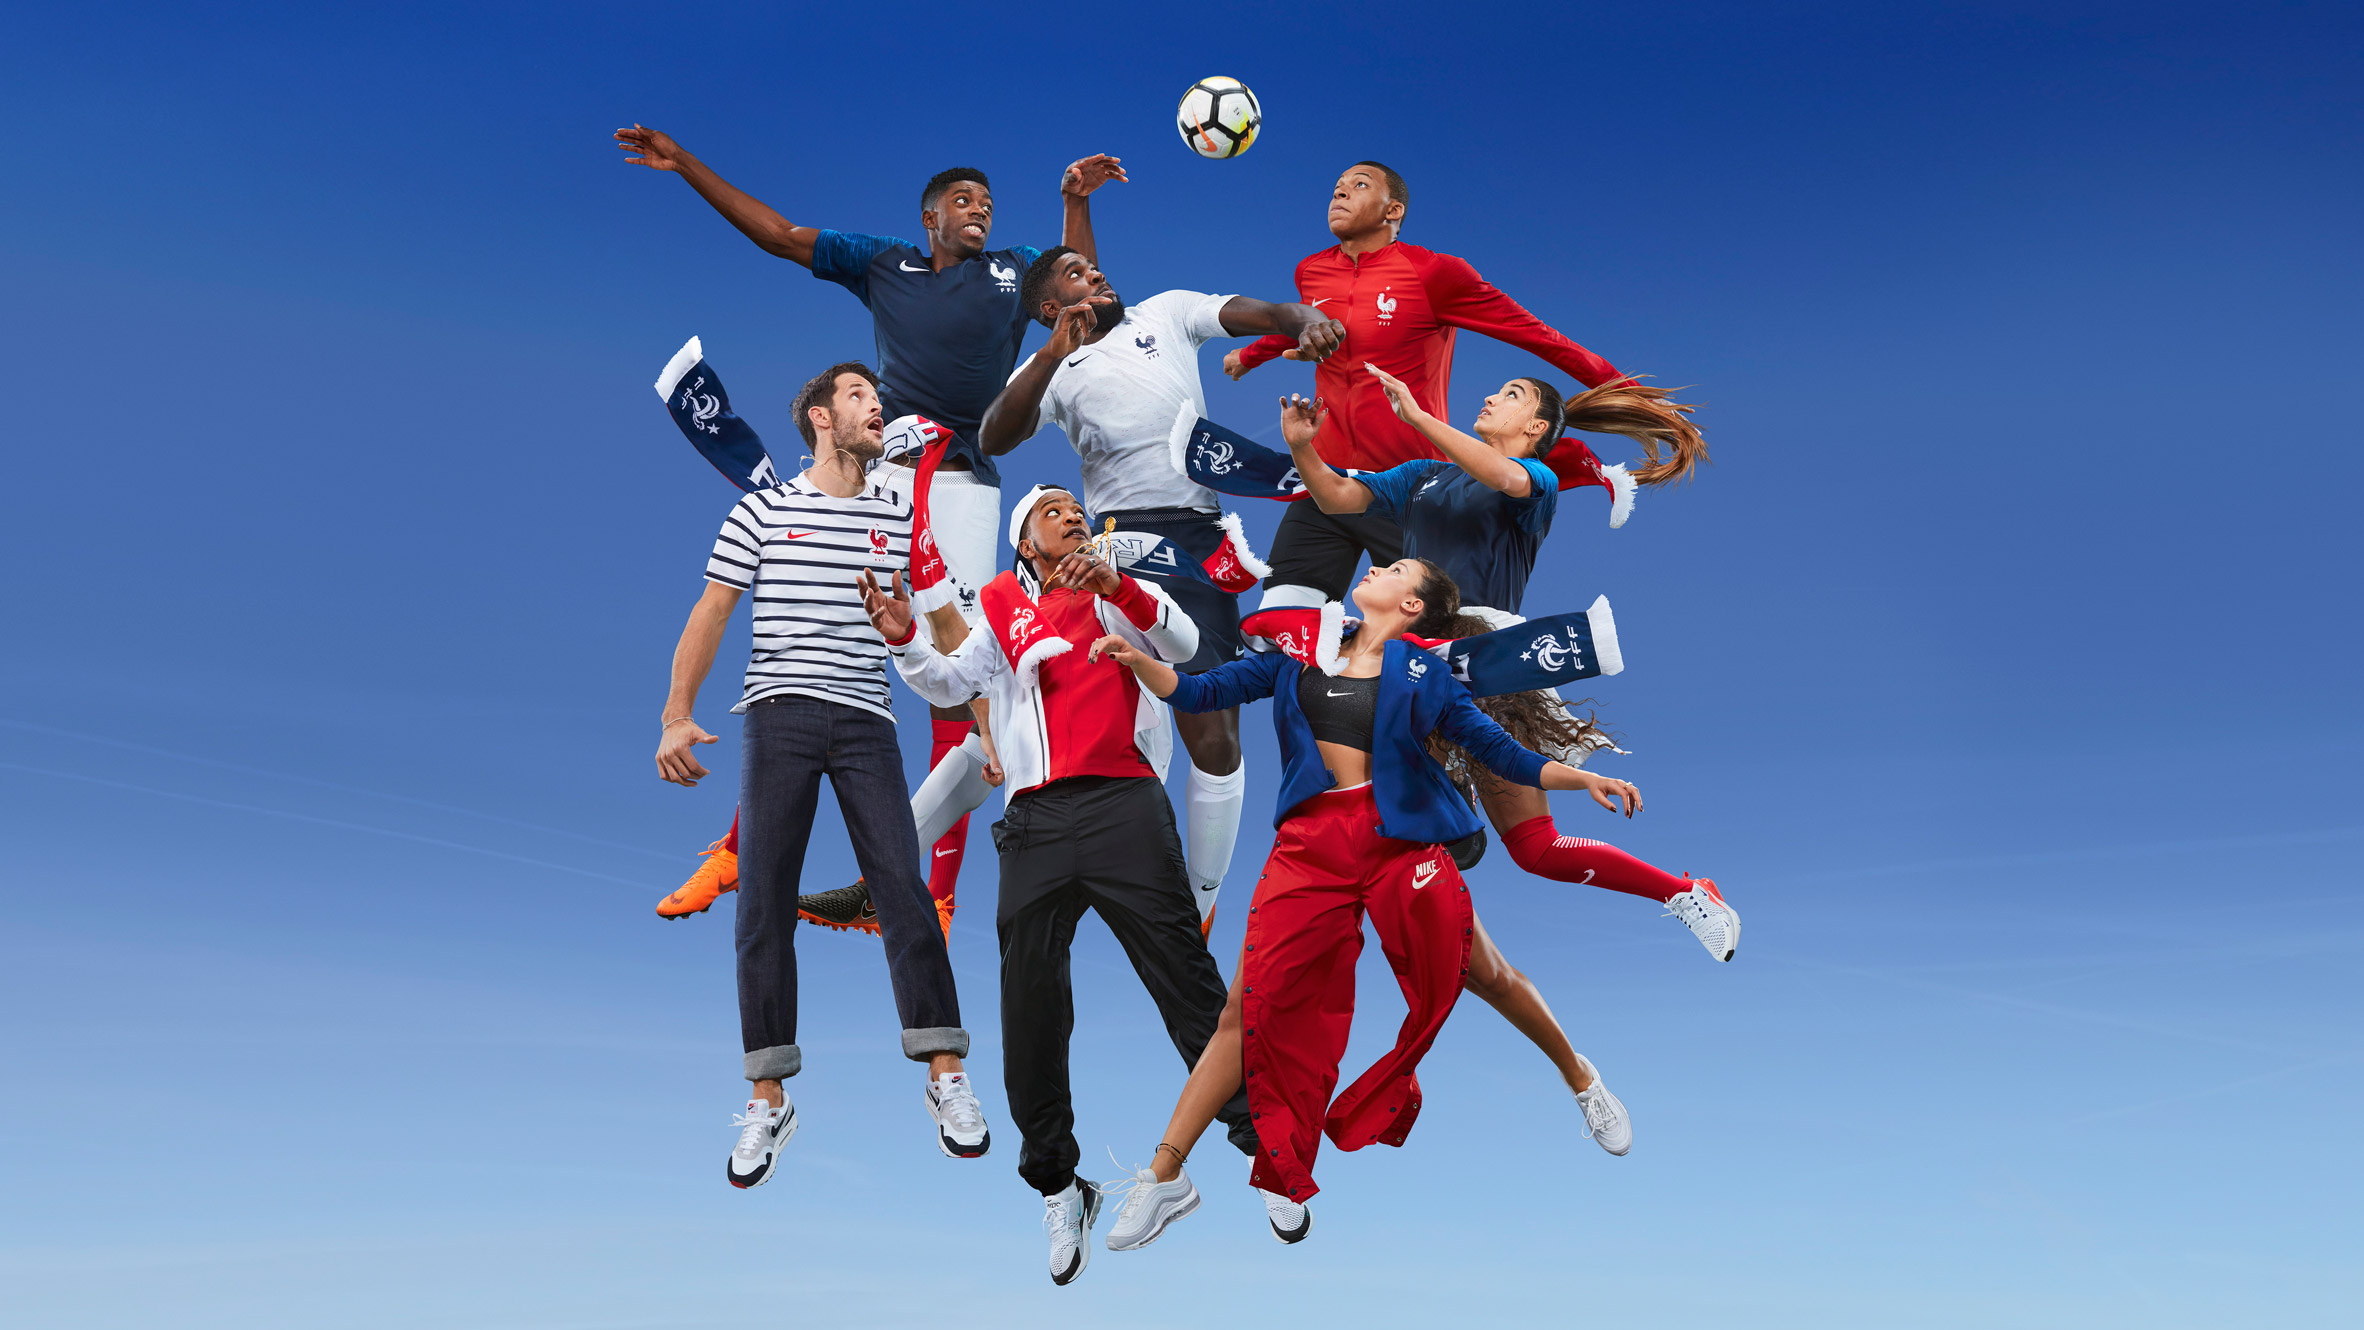 Nike's World Cup 2018 kits for France are designed "express patriotism"